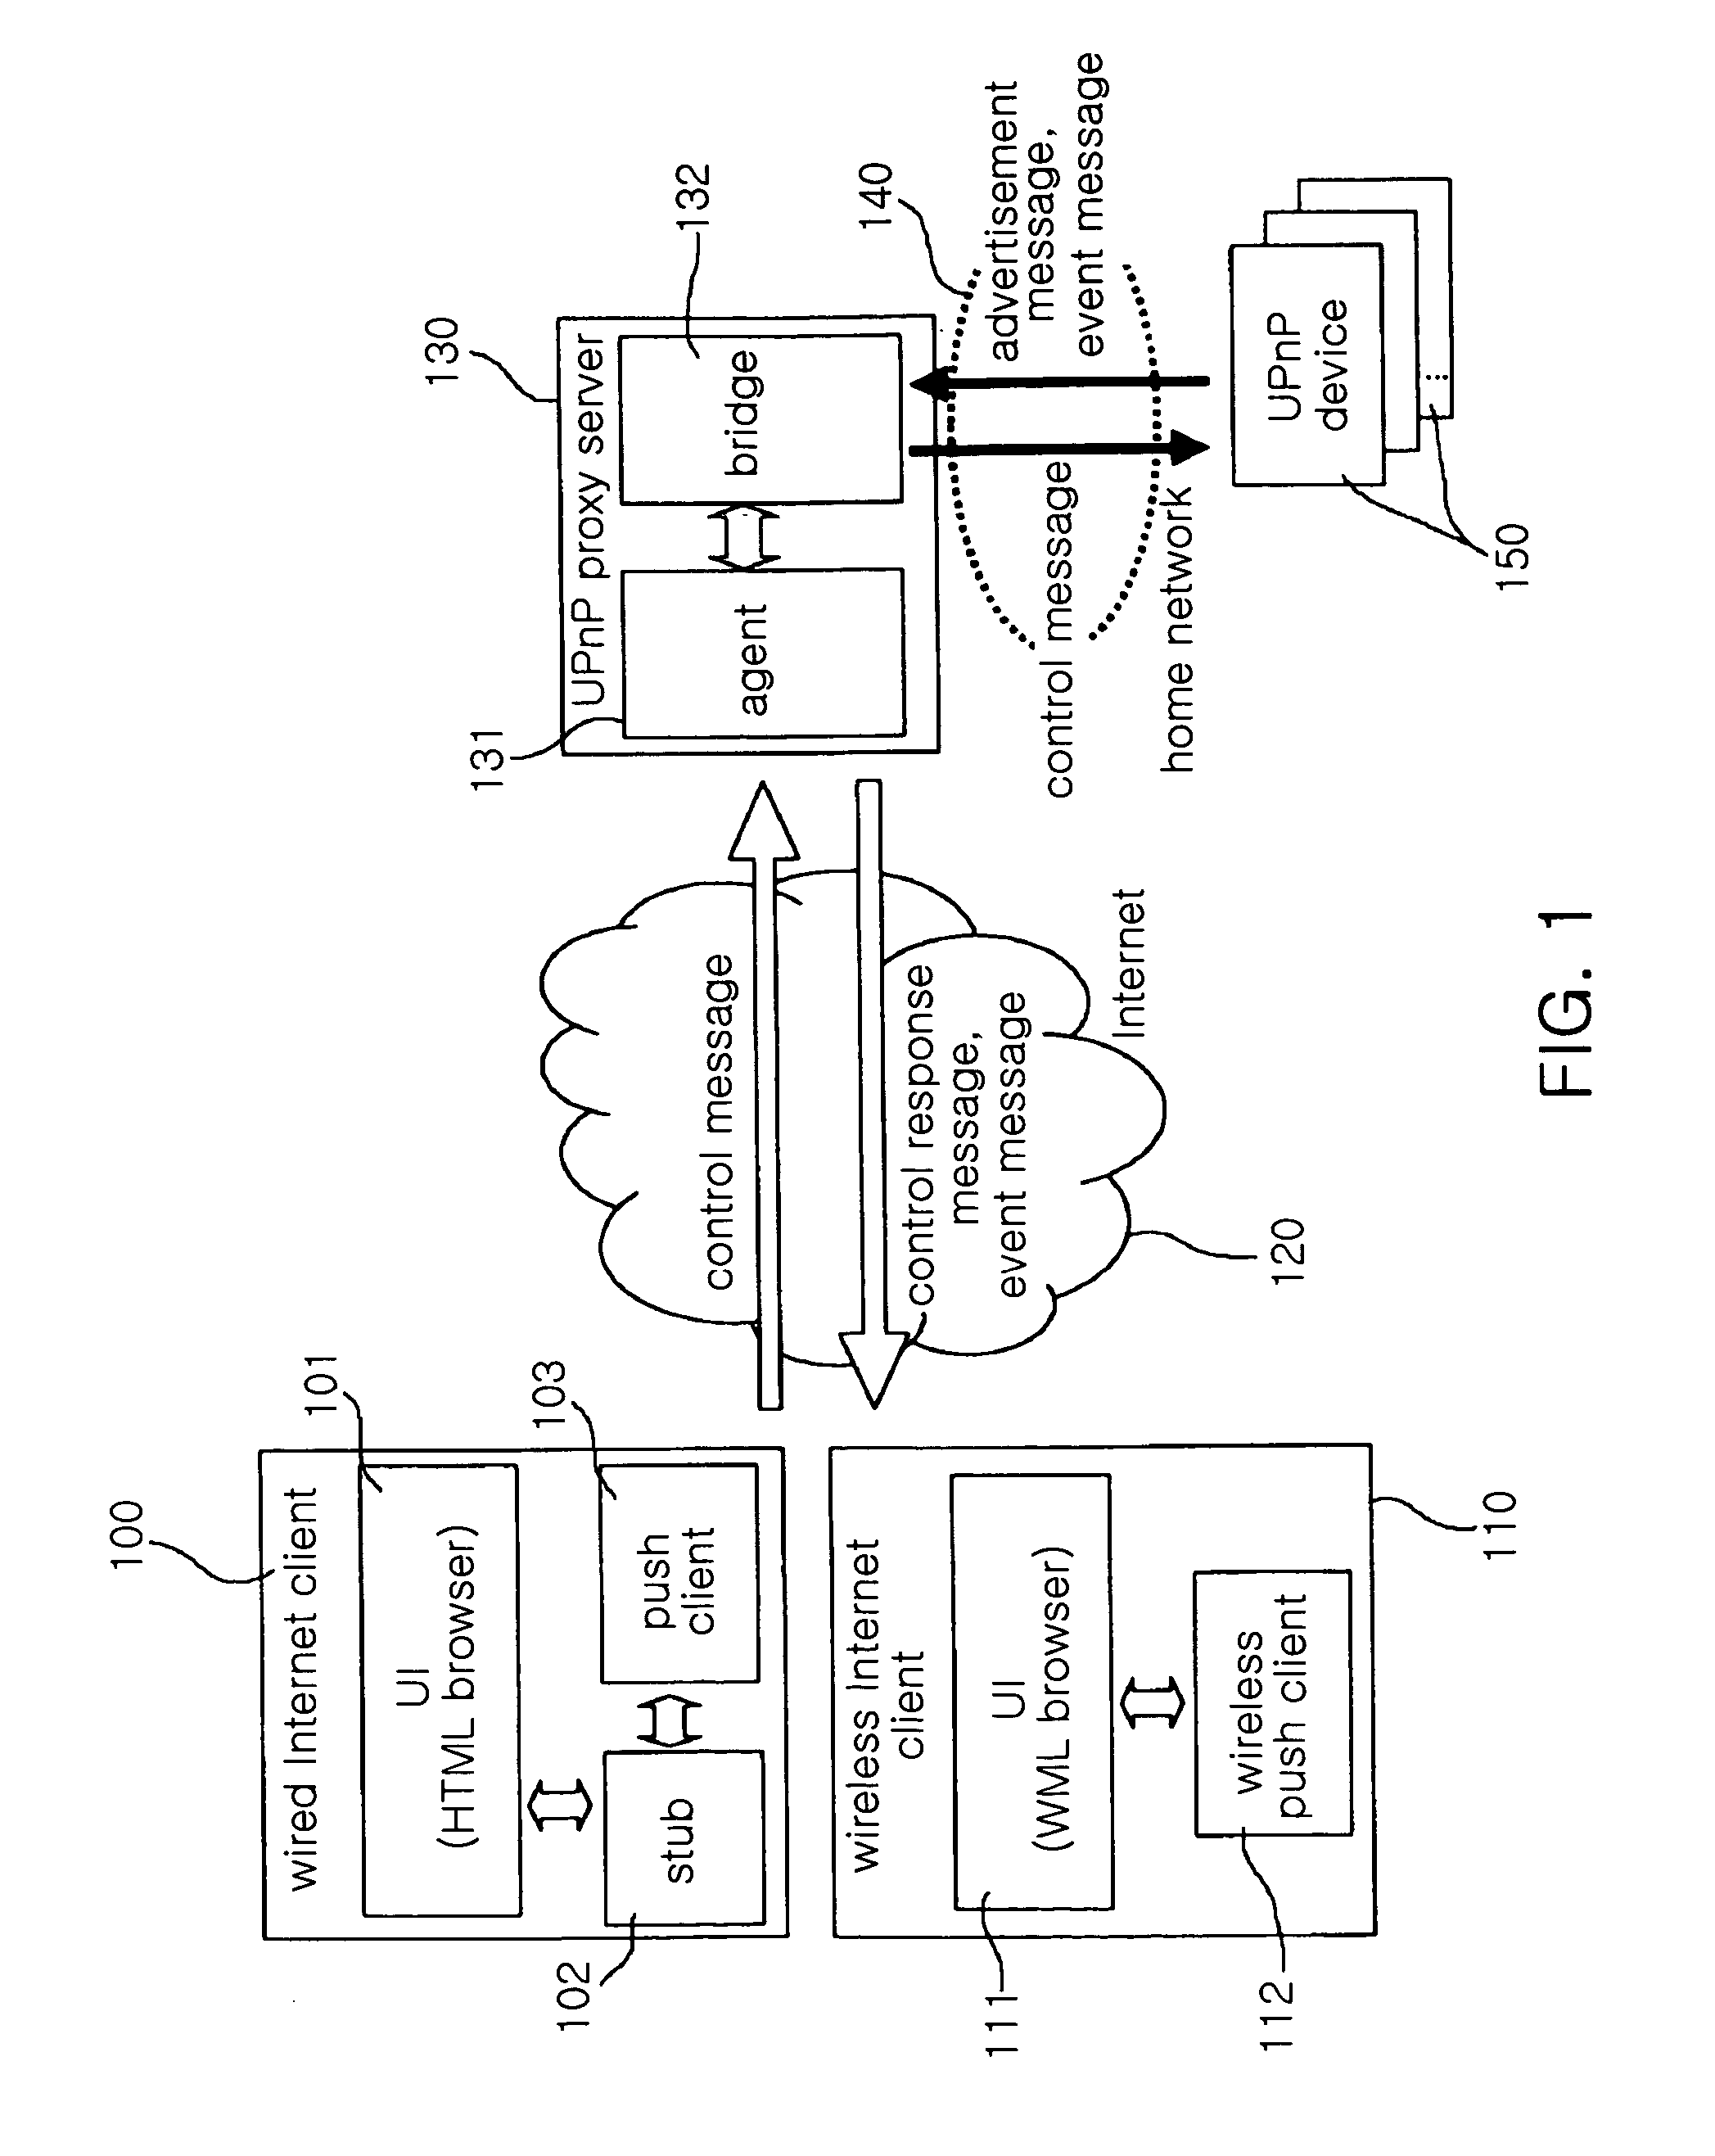 Apparatus and method for managing and controlling UPnP devices in home network over external internet network